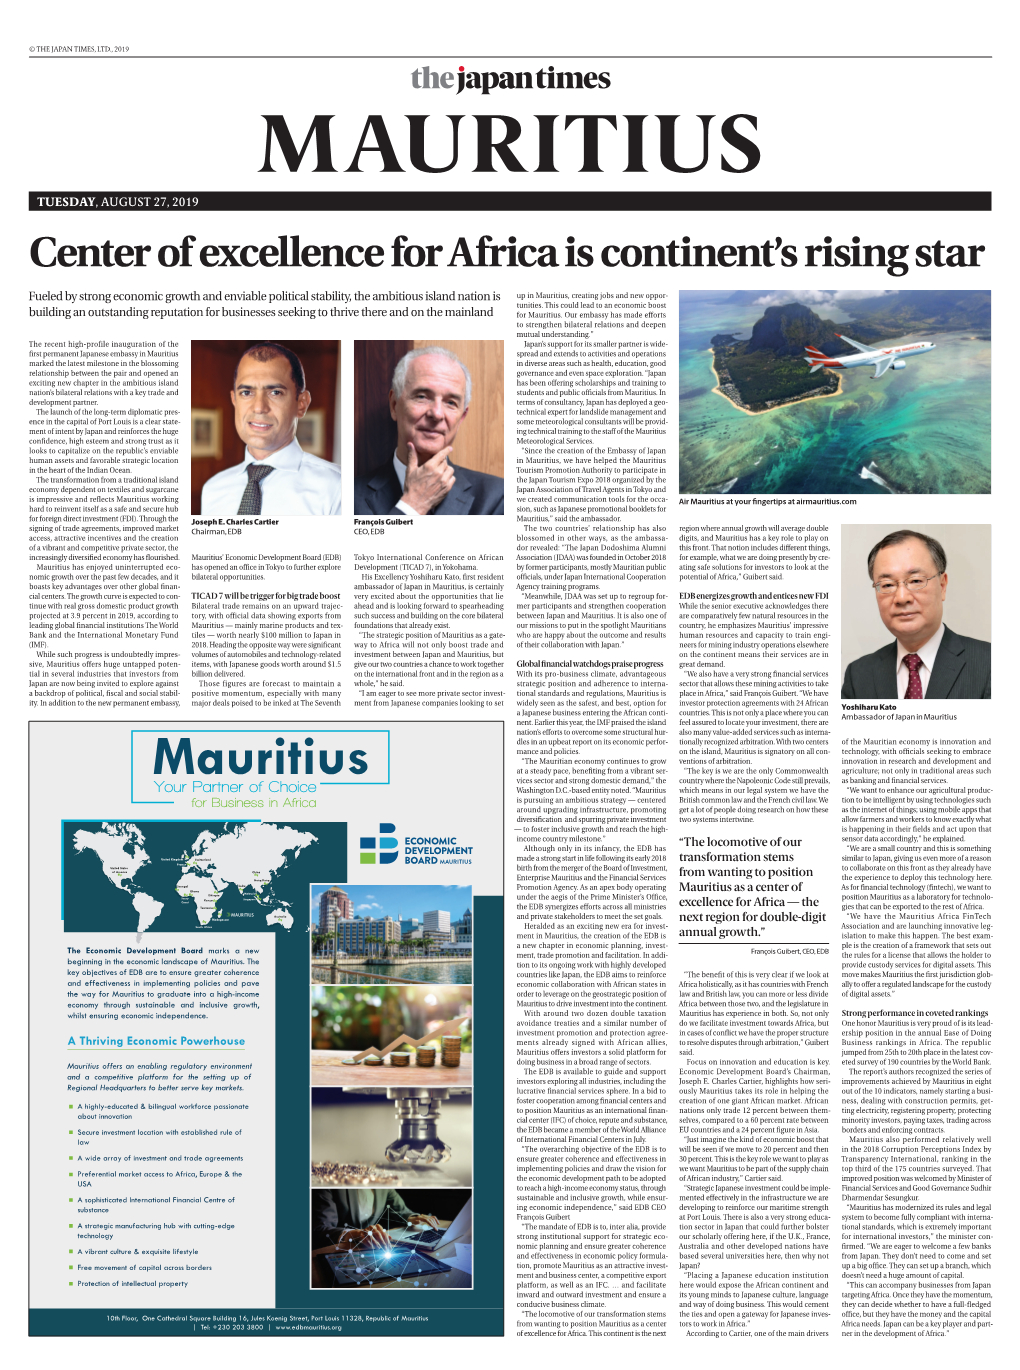 MAURITIUS TUESDAY, AUGUST 27, 2019 Center of Excellence for Africa Is Continent’S Rising Star